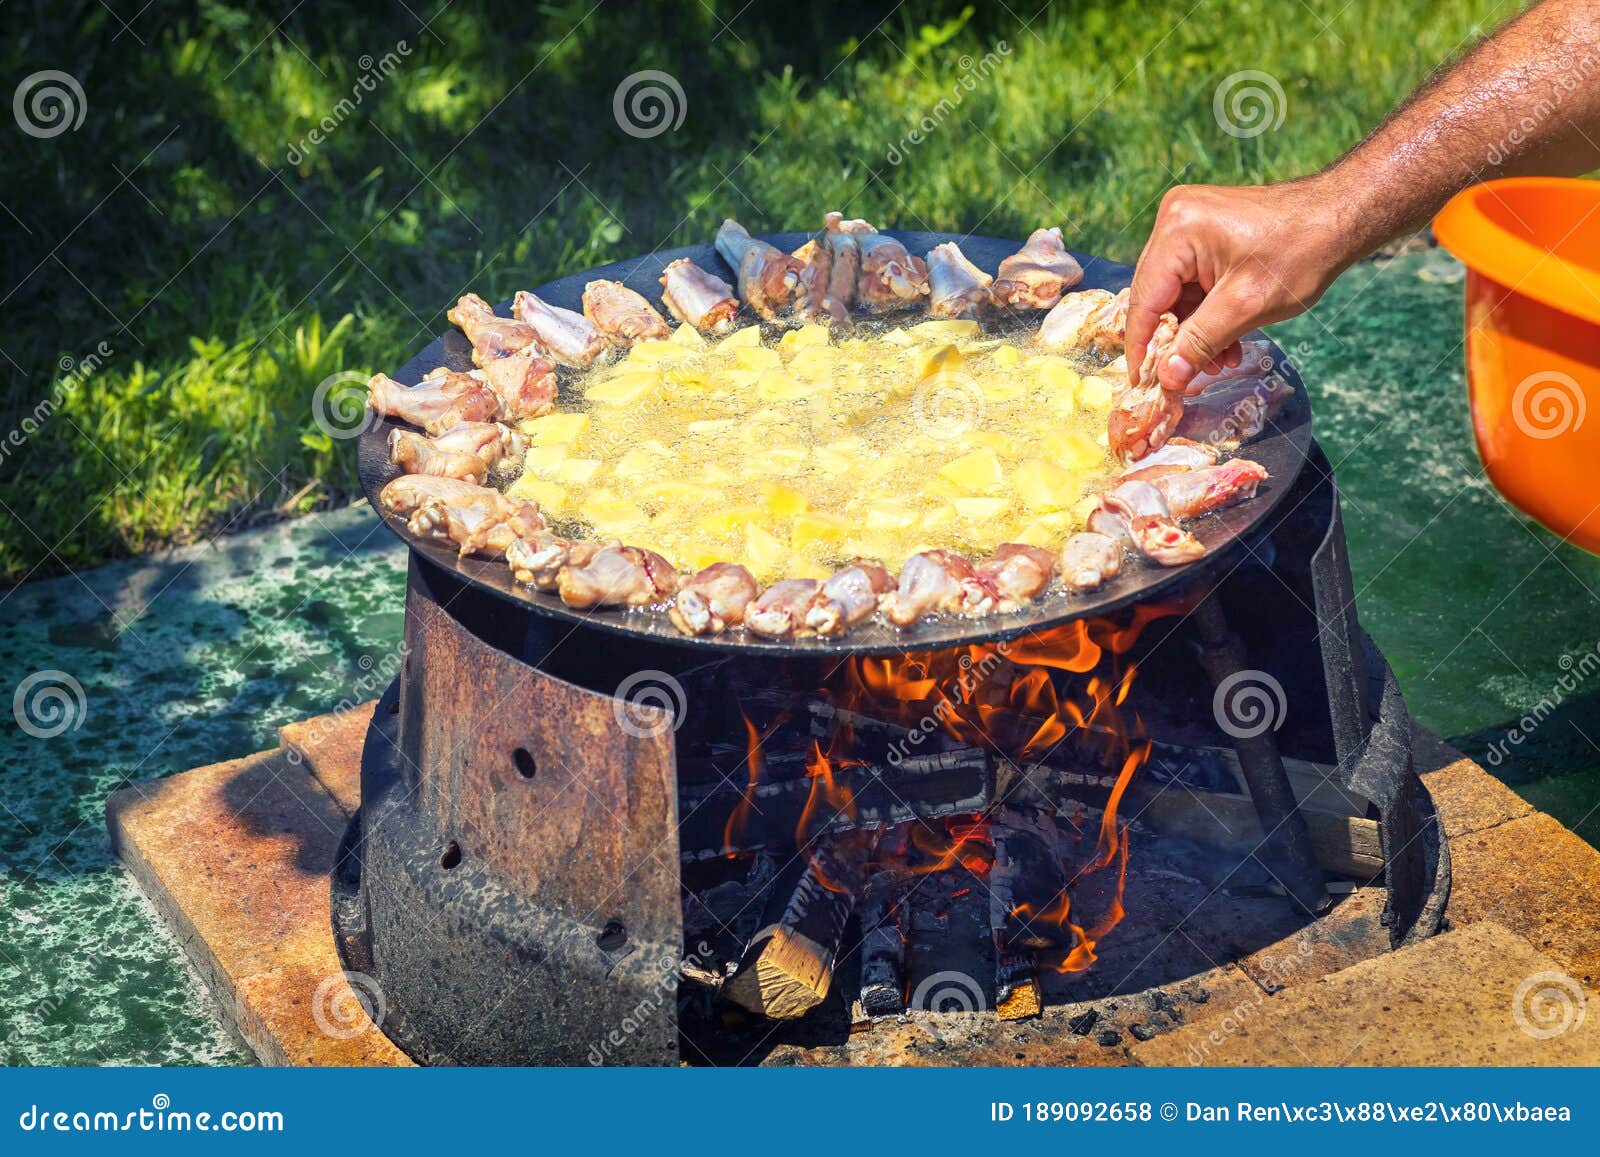 Man Chicken Wings and at Barbecue Grill Disc Wok at Backyard Bbq Stock Photo - Image of cooked, close: 189092658